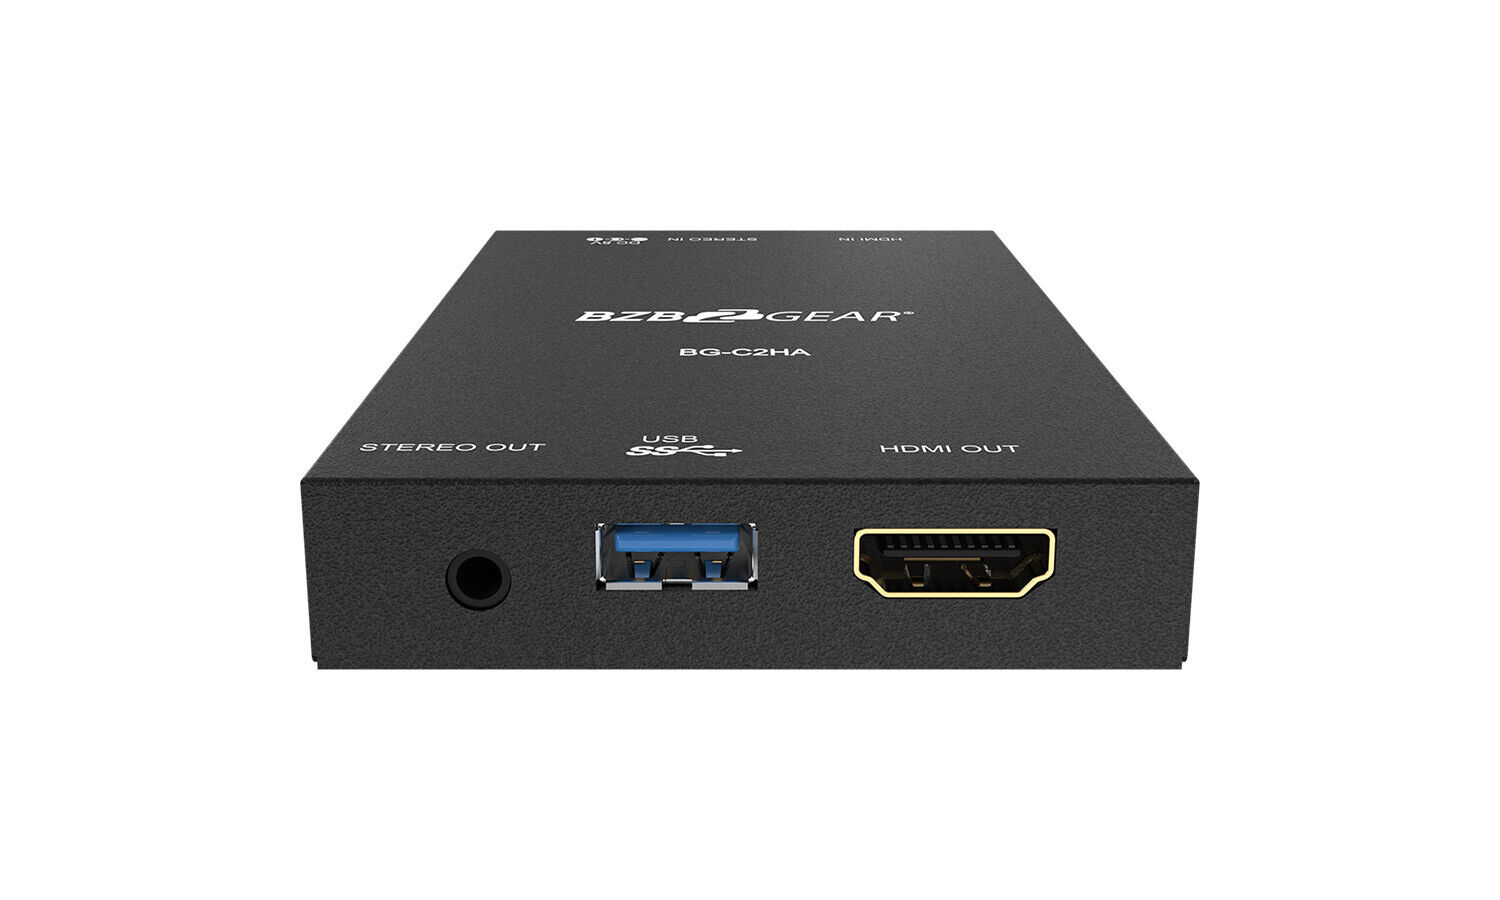 BZBGEAR USB 3.0 1080P FHD Video Capture Card with HDMI Loop-out and Audio